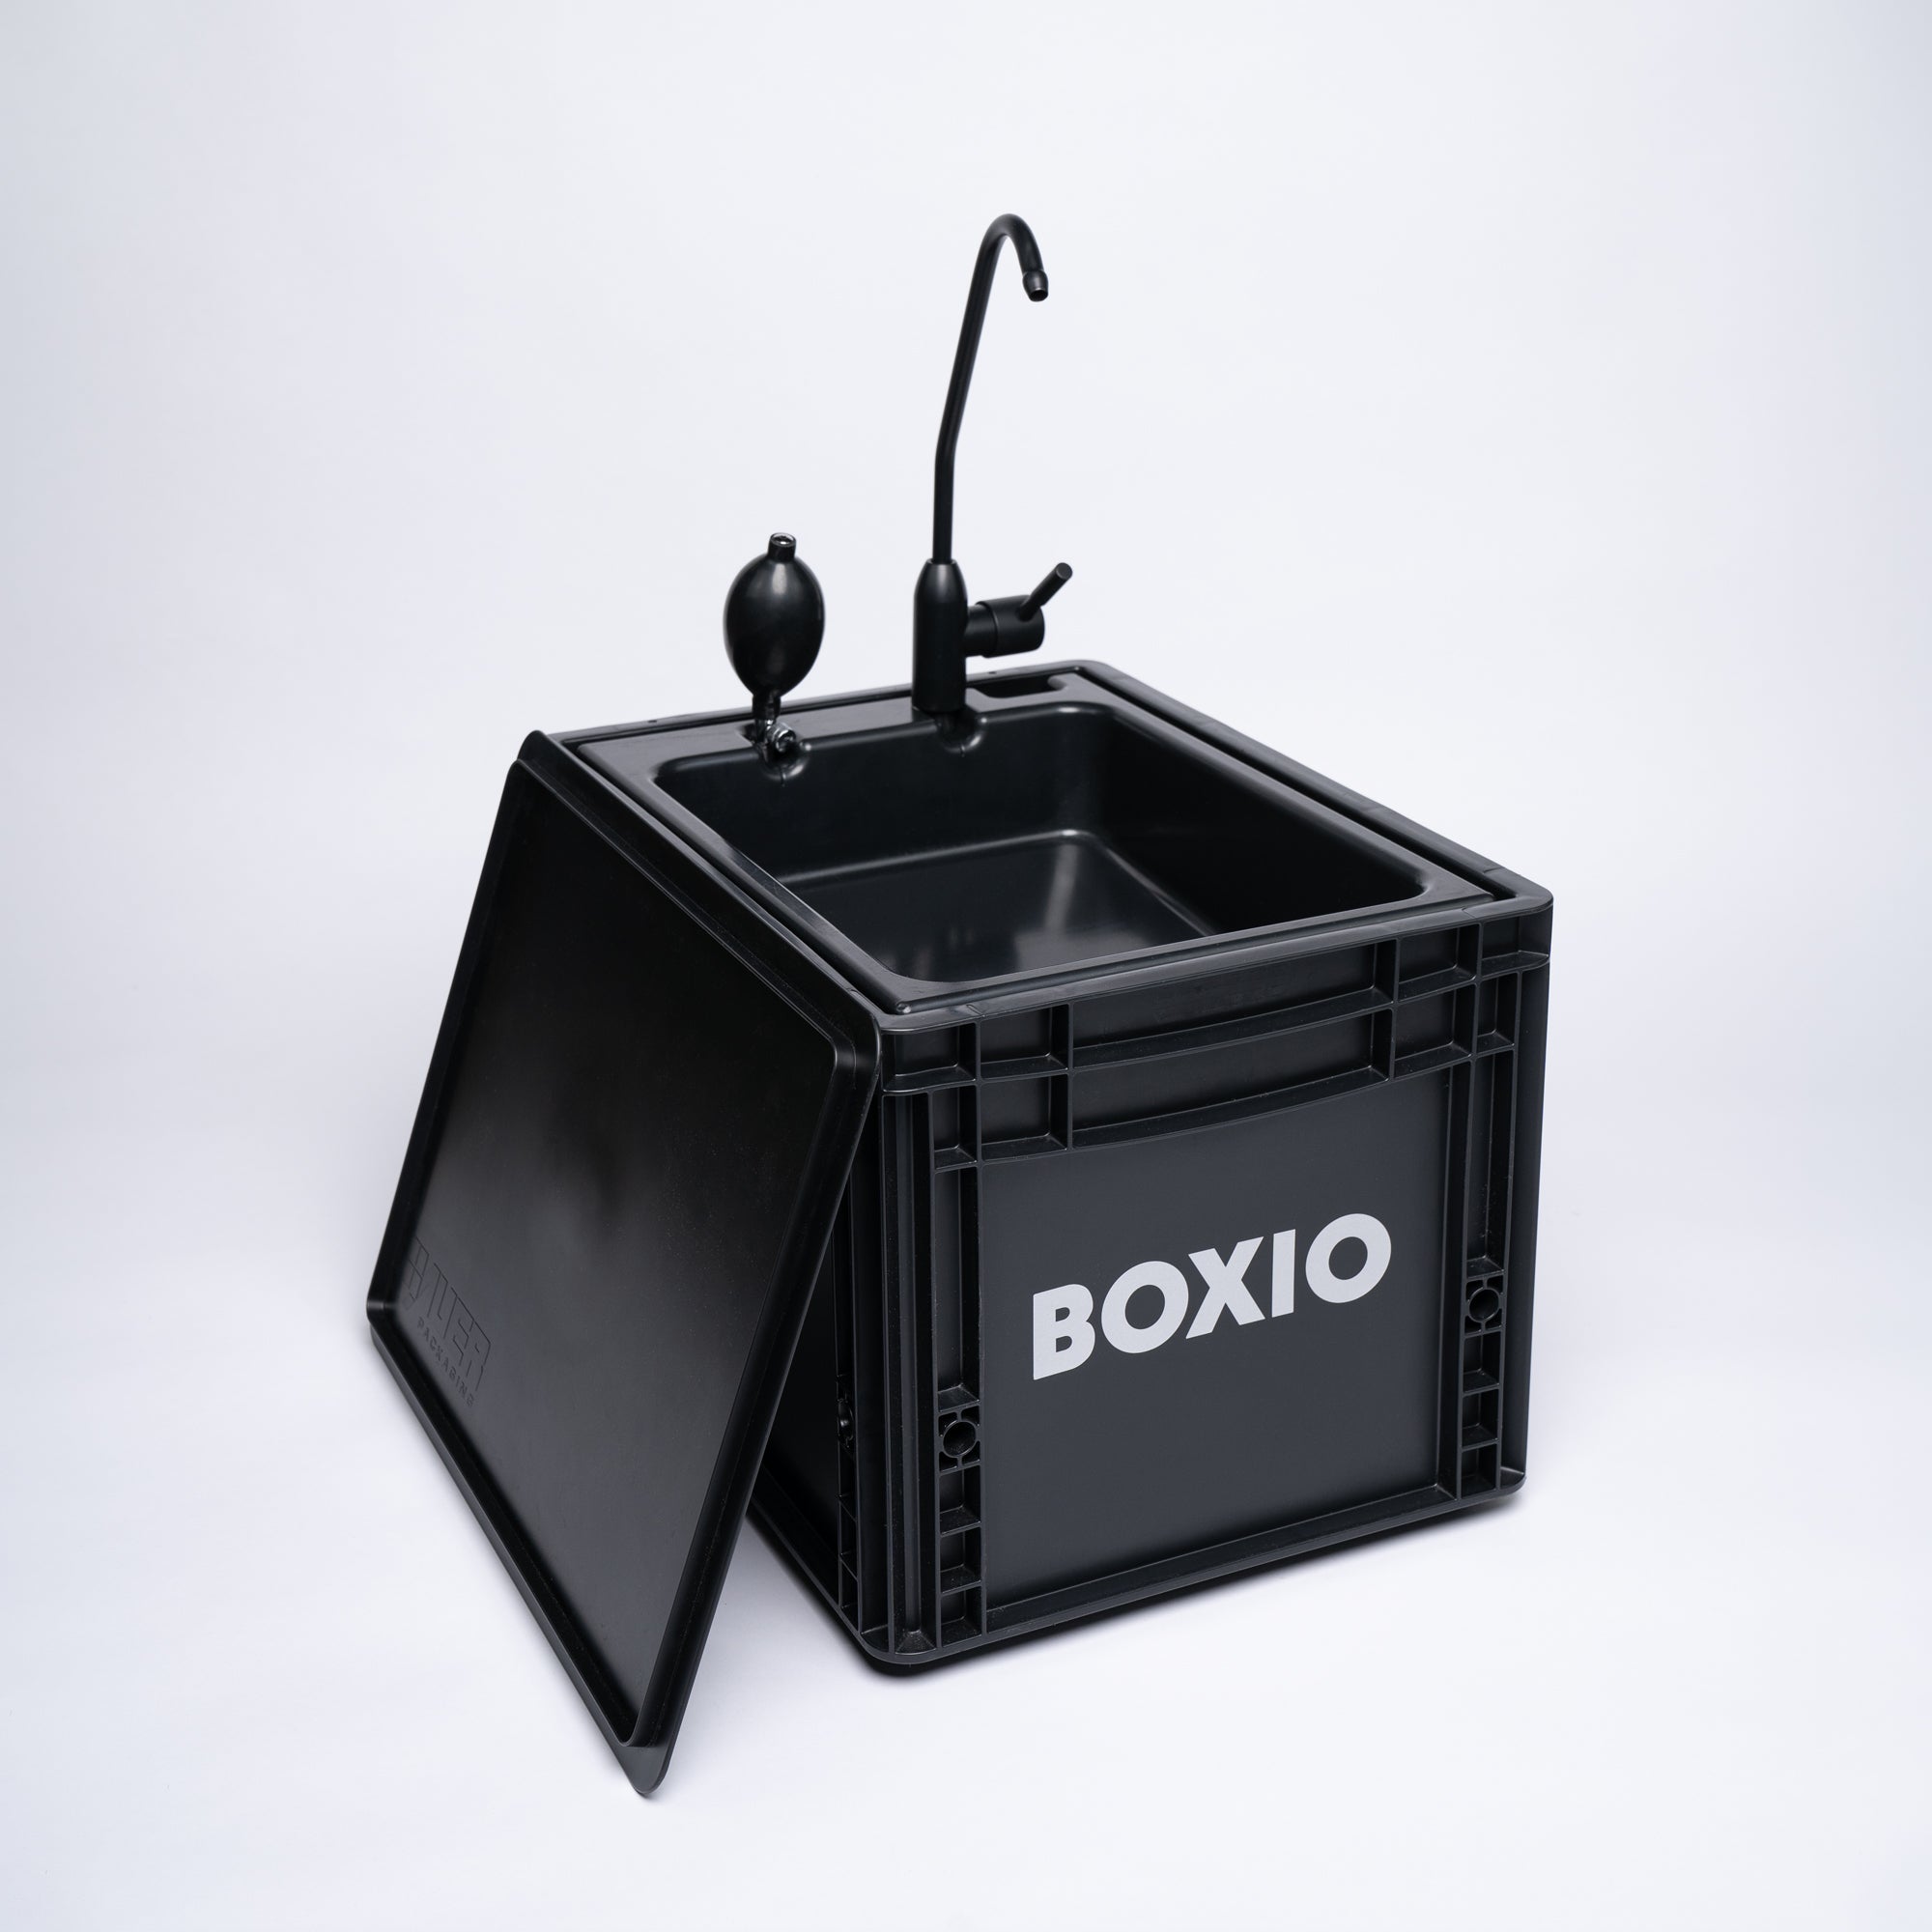 BOXIO - Wash: Portable Sink - Convenient Camping Sink Solution! Compact with Unique Design, Separate Canister, Lightweight Mobile Sink for Garden